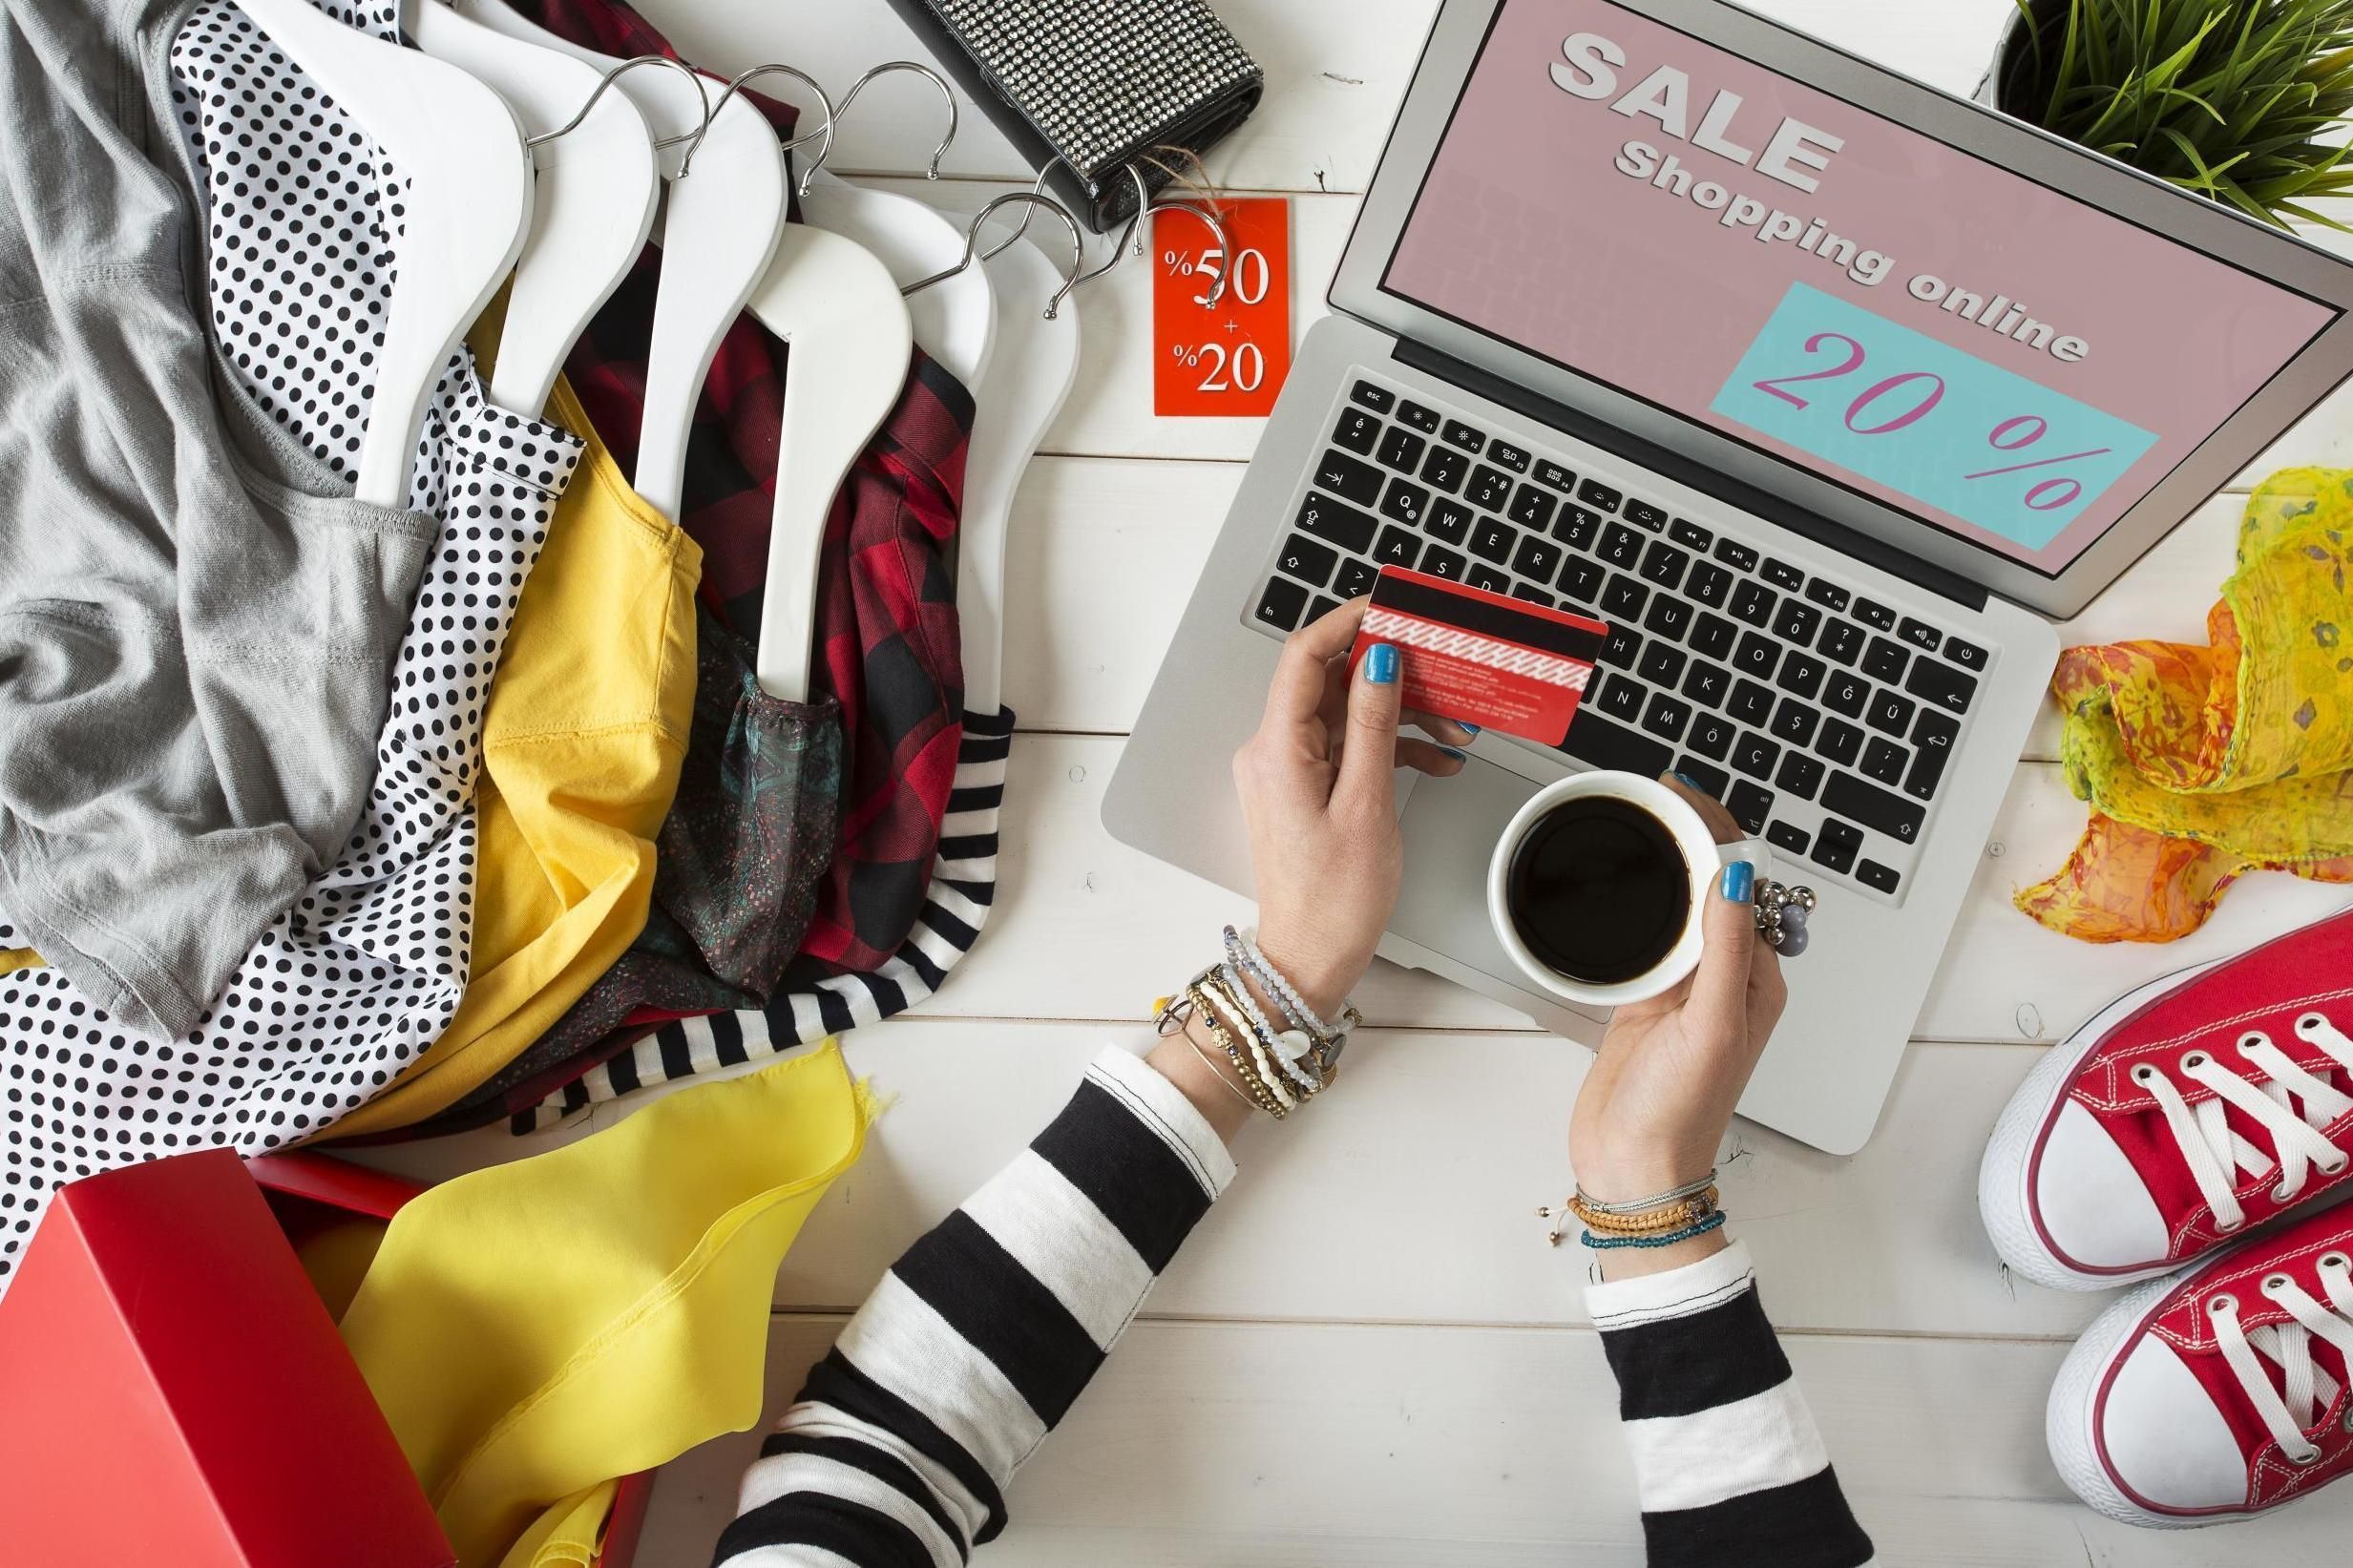 Tips for Shopping Online, Safely and Safely